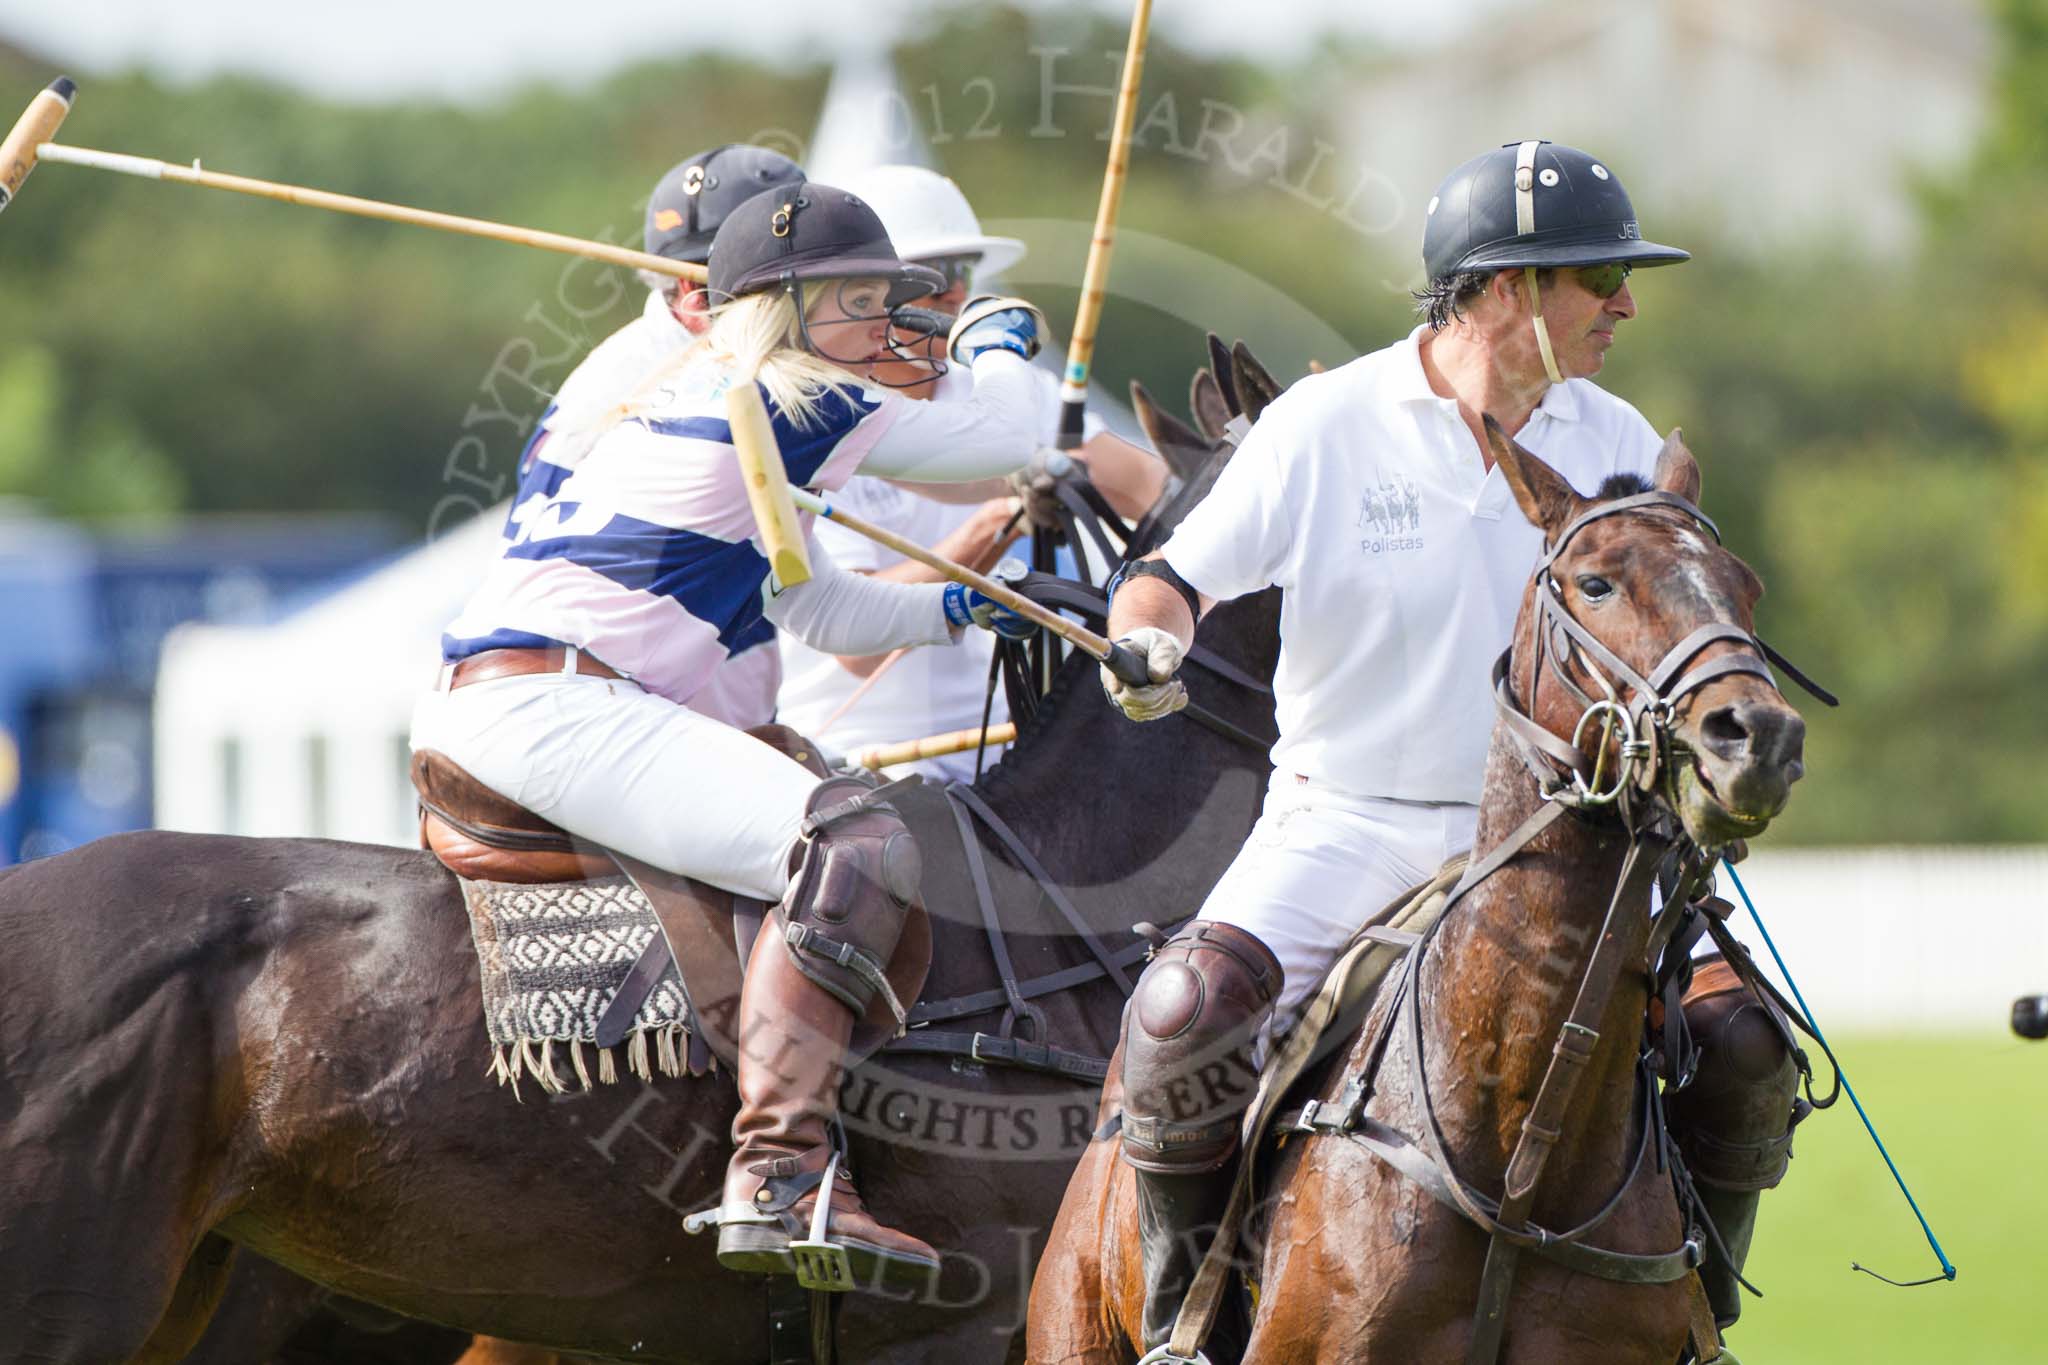 DBPC Polo in the Park 2012: Rated People Polo Team #2, Tariq Dag Khan . Behind JCS #3, Emma Nicolson, #1, Andy Coulbeck, and Rated 4#, Johnny Moreland-Lynn..
Dallas Burston Polo Club,
Stoneythorpe Estate,
Southam,
Warwickshire,
United Kingdom,
on 16 September 2012 at 11:18, image #85